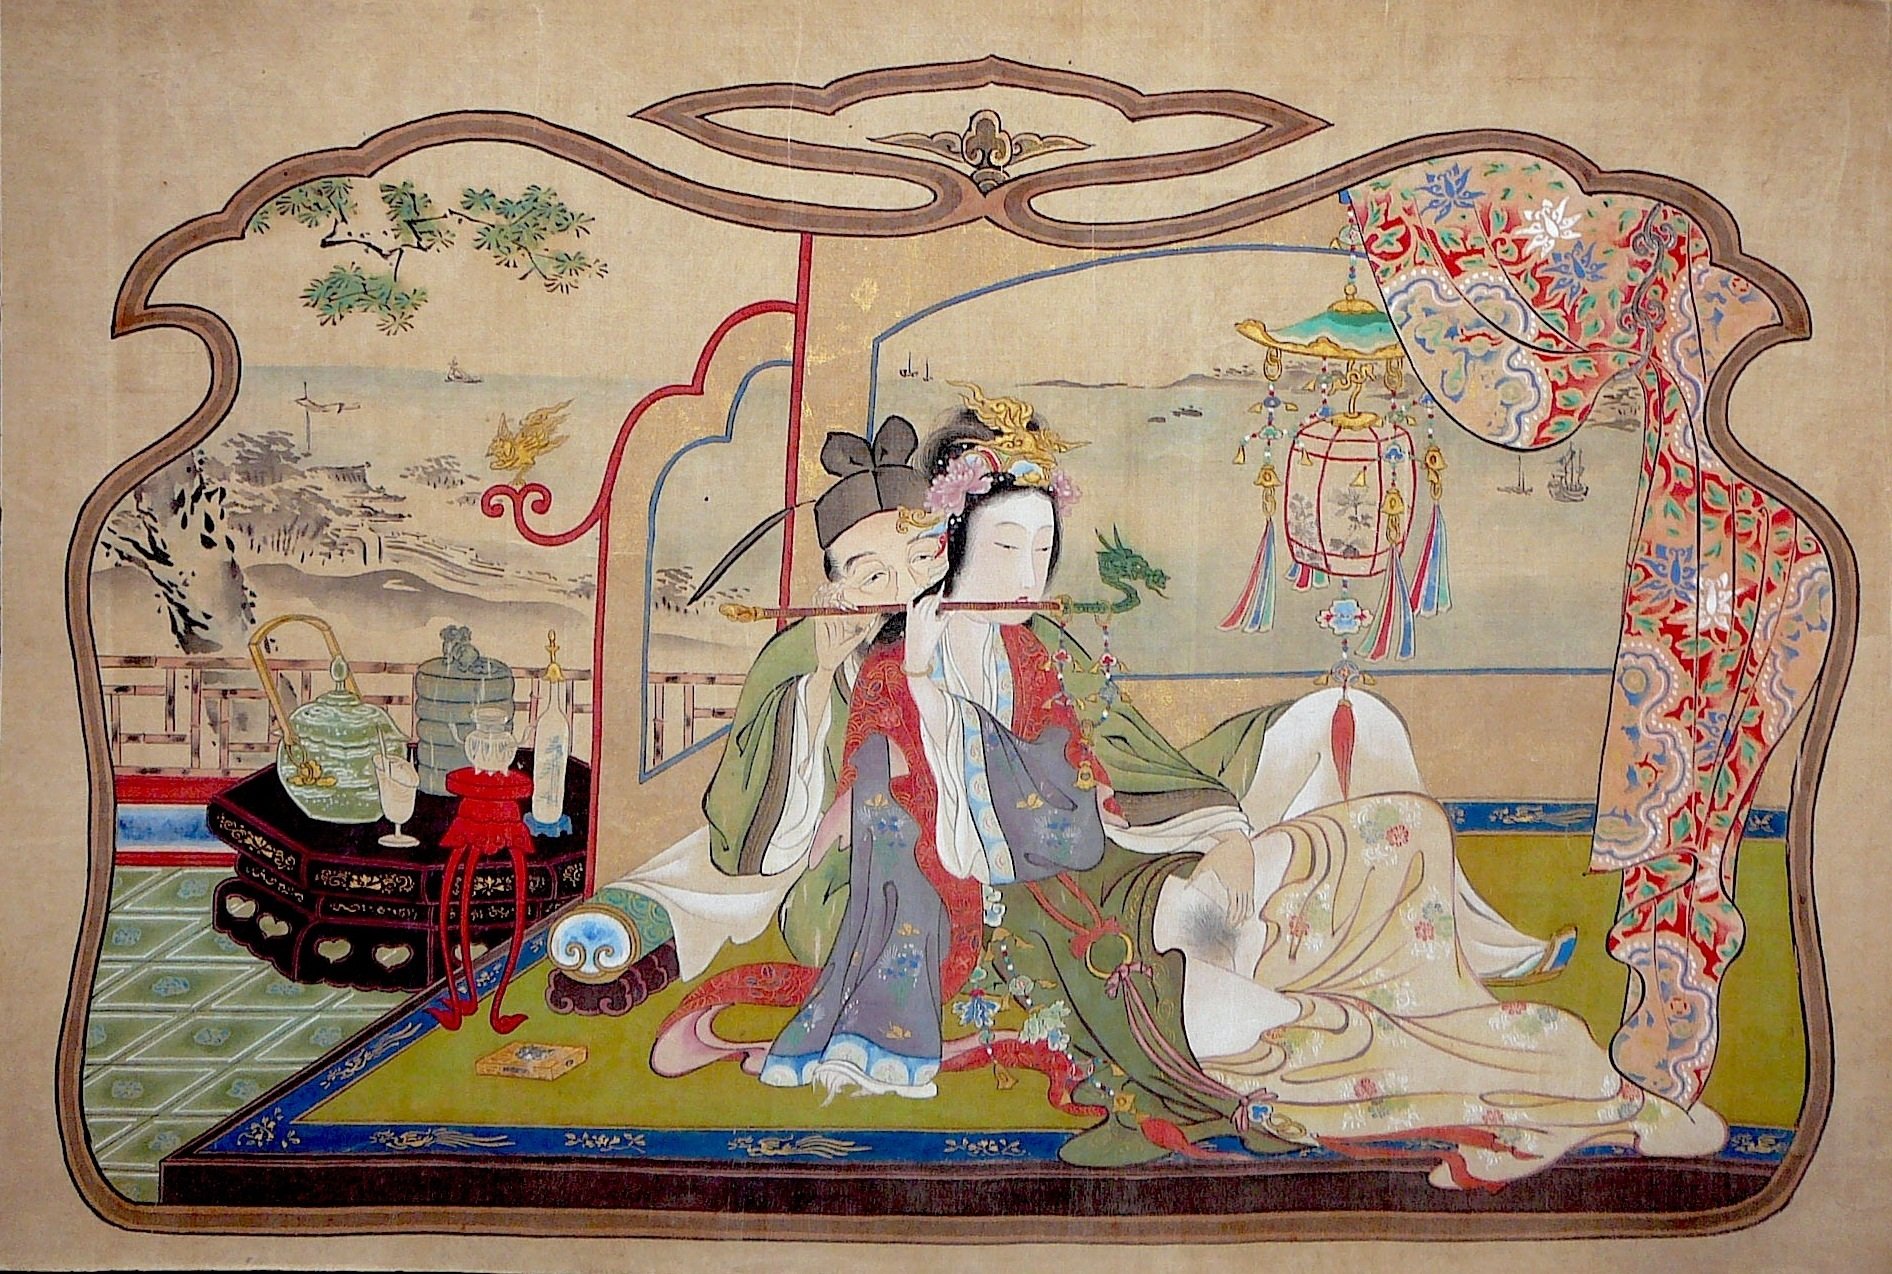 Picture one: Imperial couple playing the flute (c.1800-20) by Hosoda Eishi